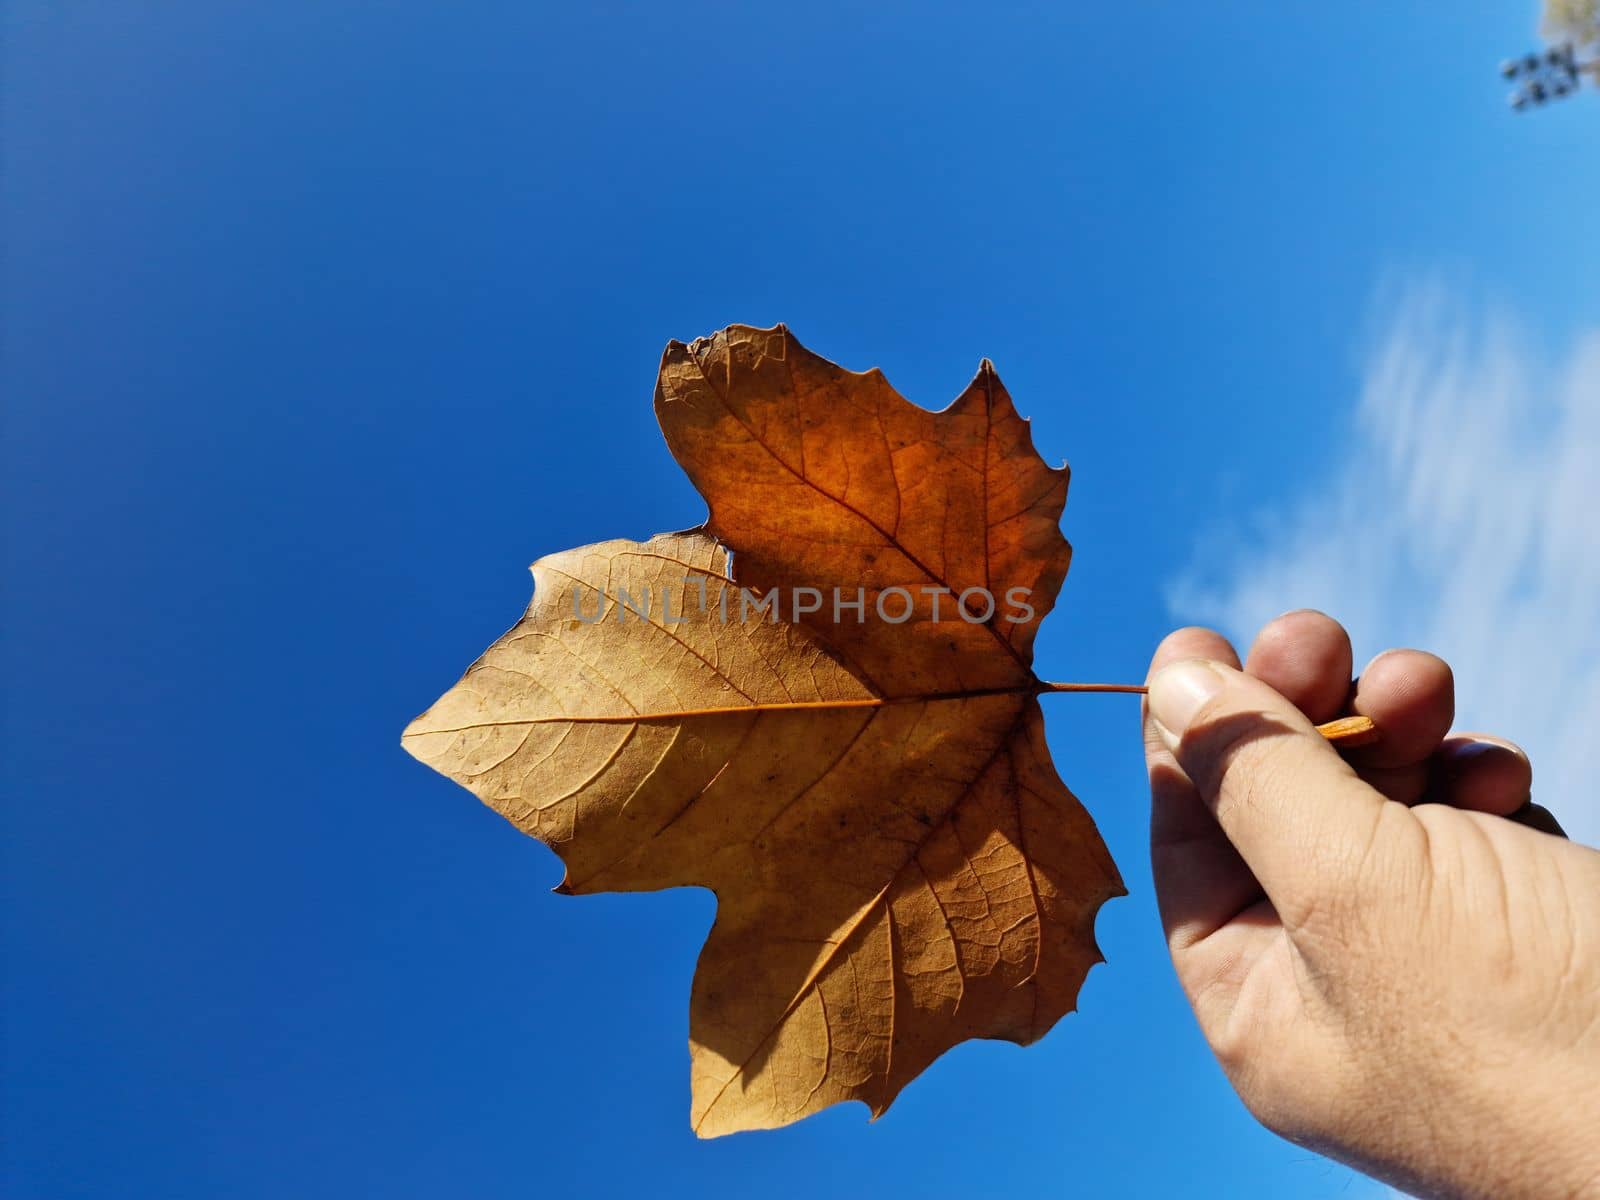 man's hand holding a tree leaf with the blue sky in the background by barcielaphoto